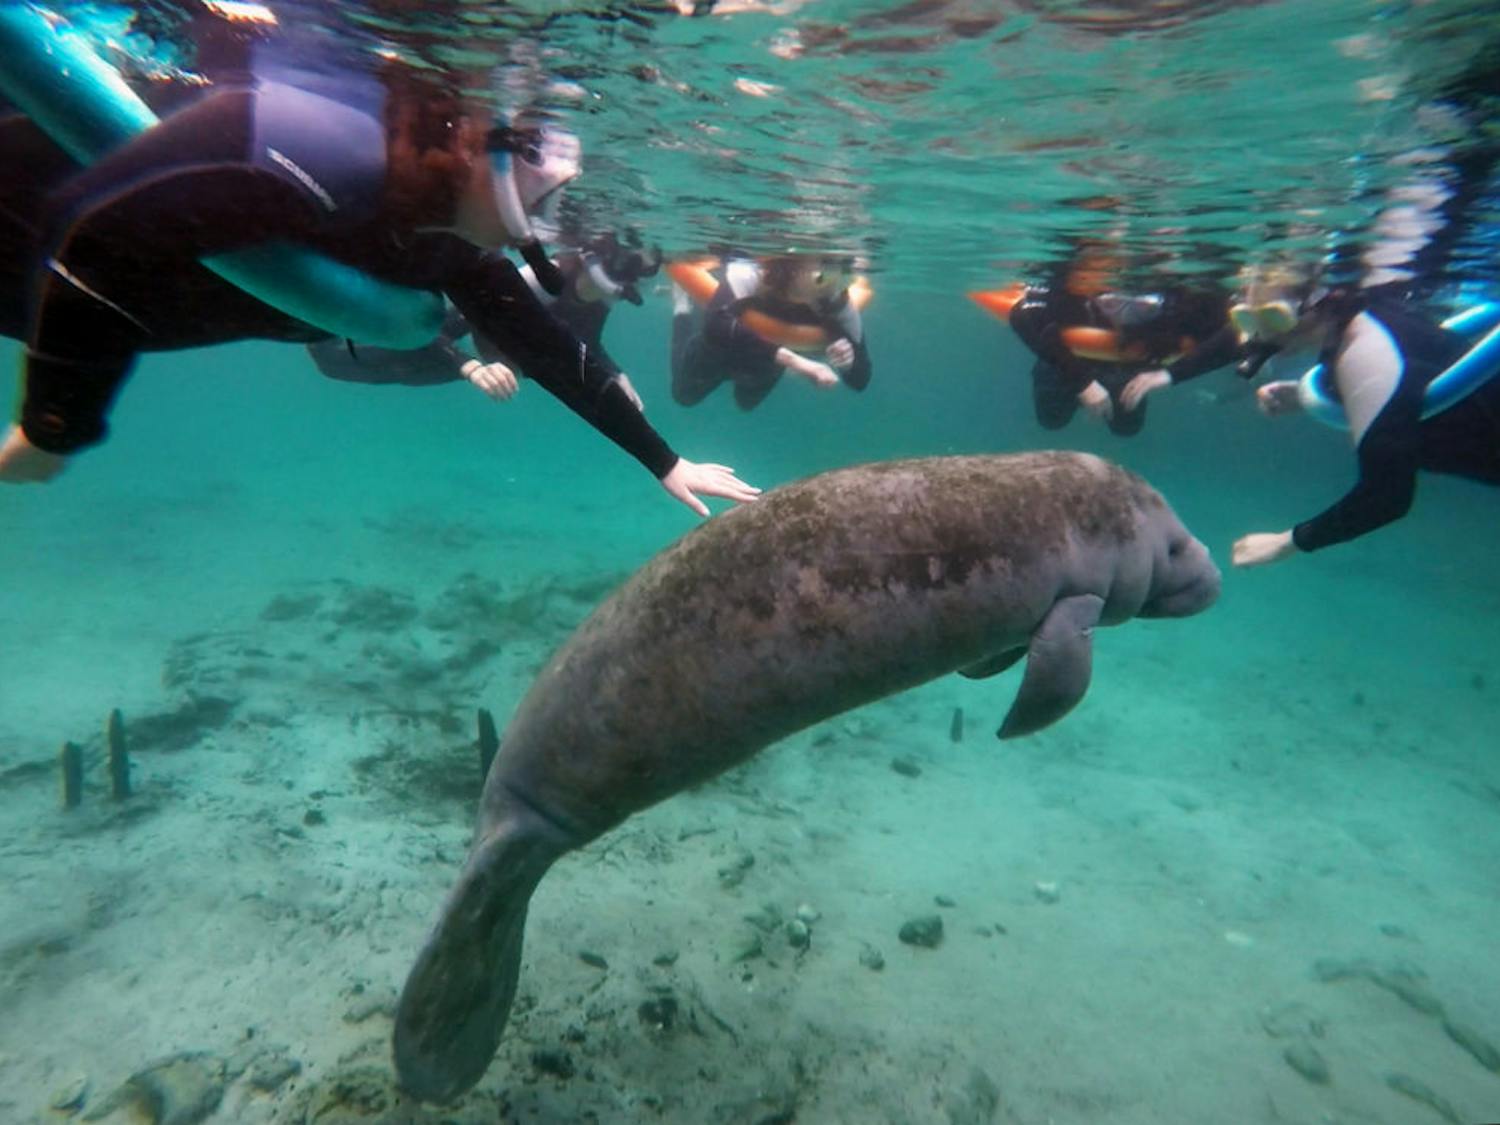 A group of UF students from Dr. Steven Johnson’s Wildlife of Florida class pet a manatee at Three Sisters Springs on Crystal River on Jan 23. Students learned first-hand that some manatees approach humans in order to be scratched and rubbed.